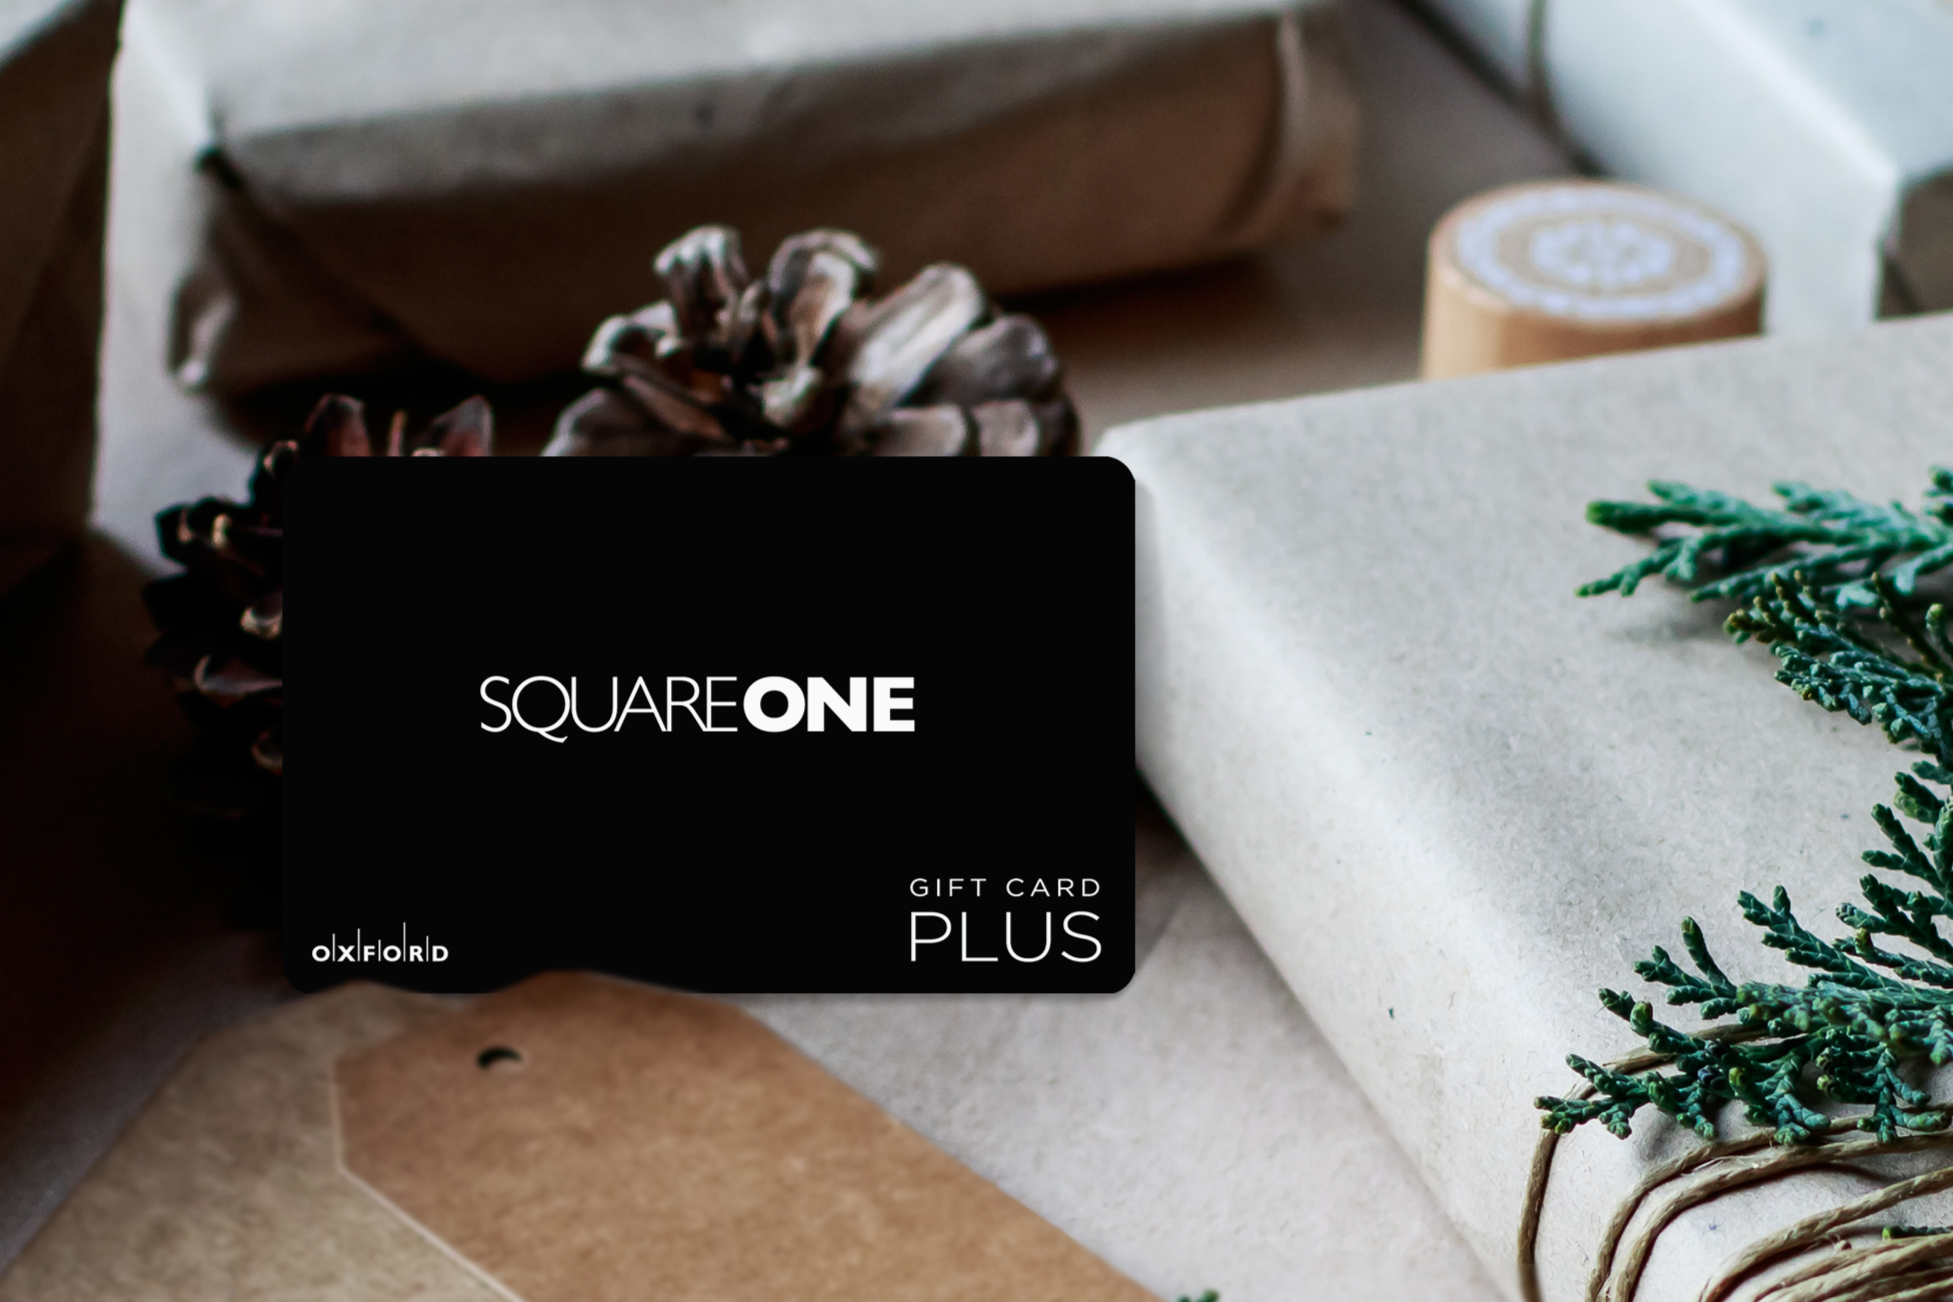 promotional image of a black Square One gift card surrounded by wrapped books in a holiday theme